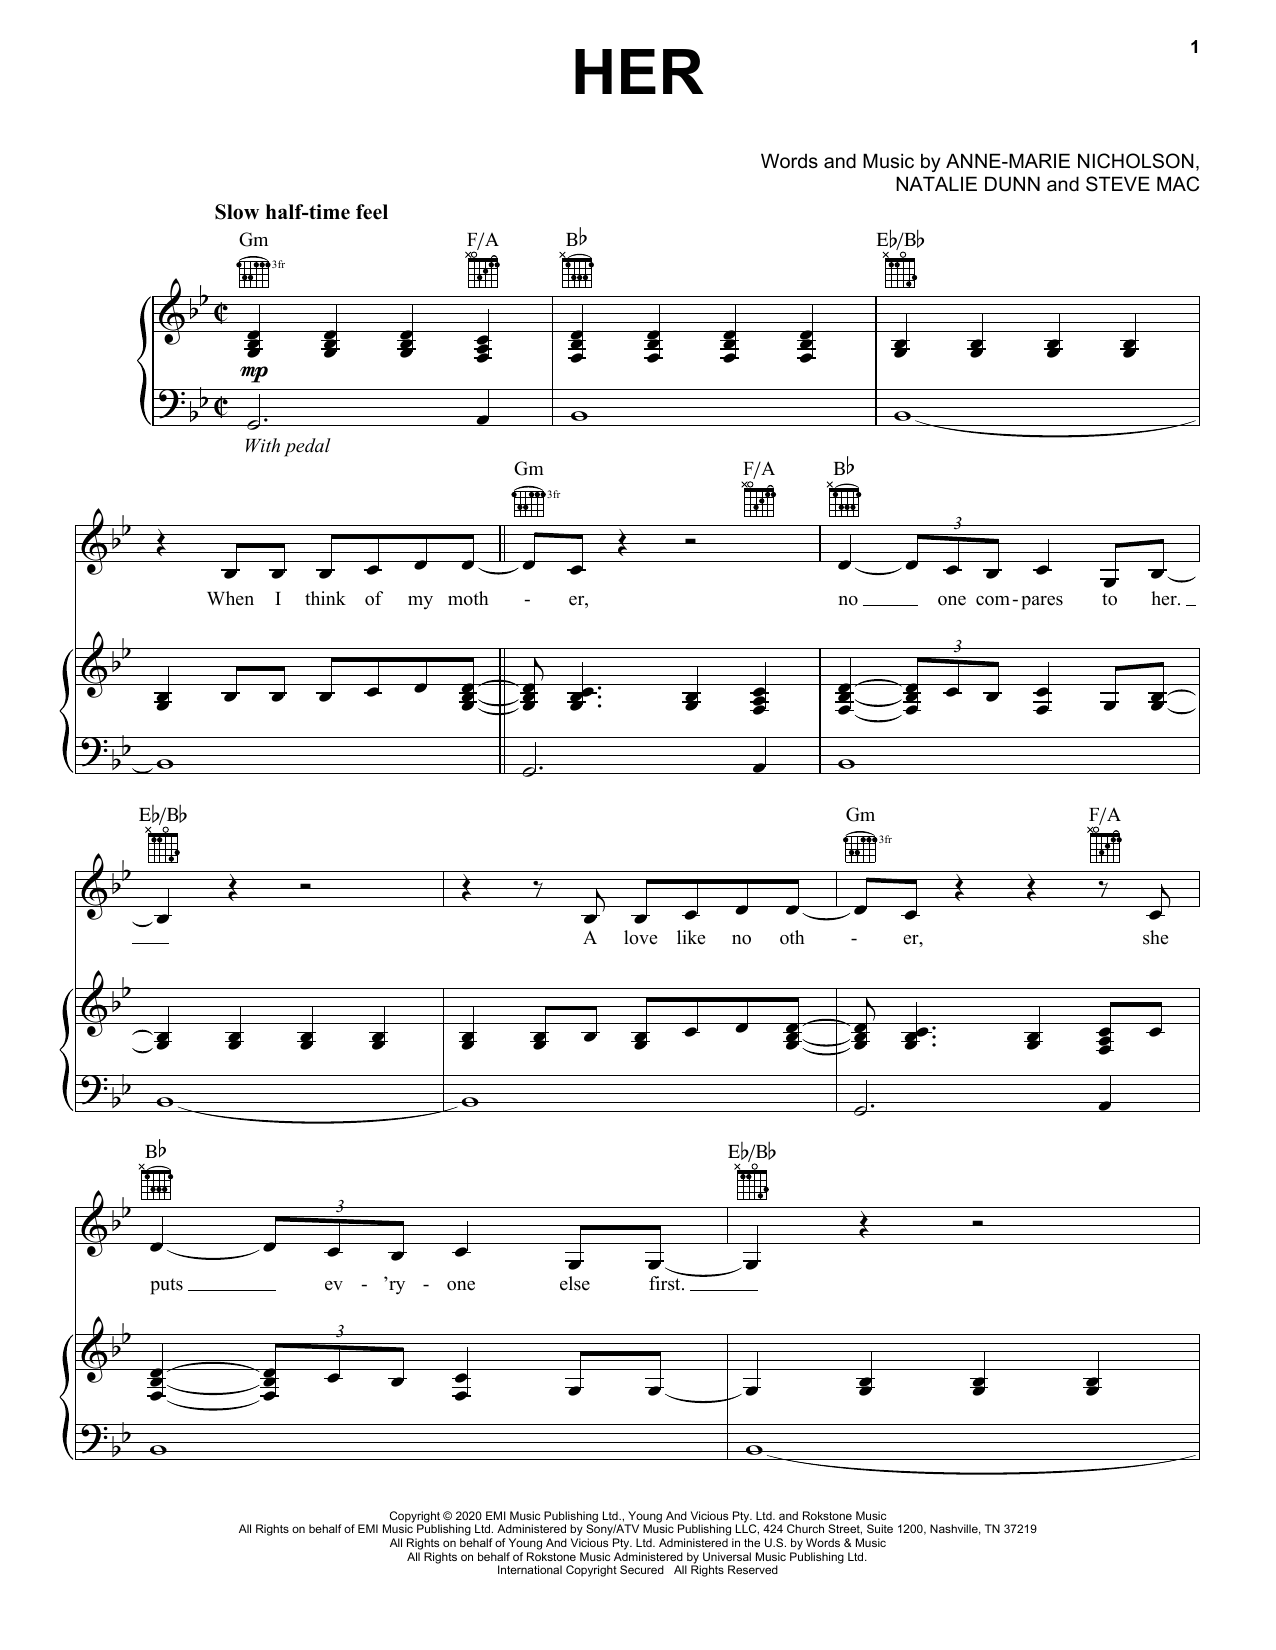 Anne-Marie Her sheet music notes printable PDF score